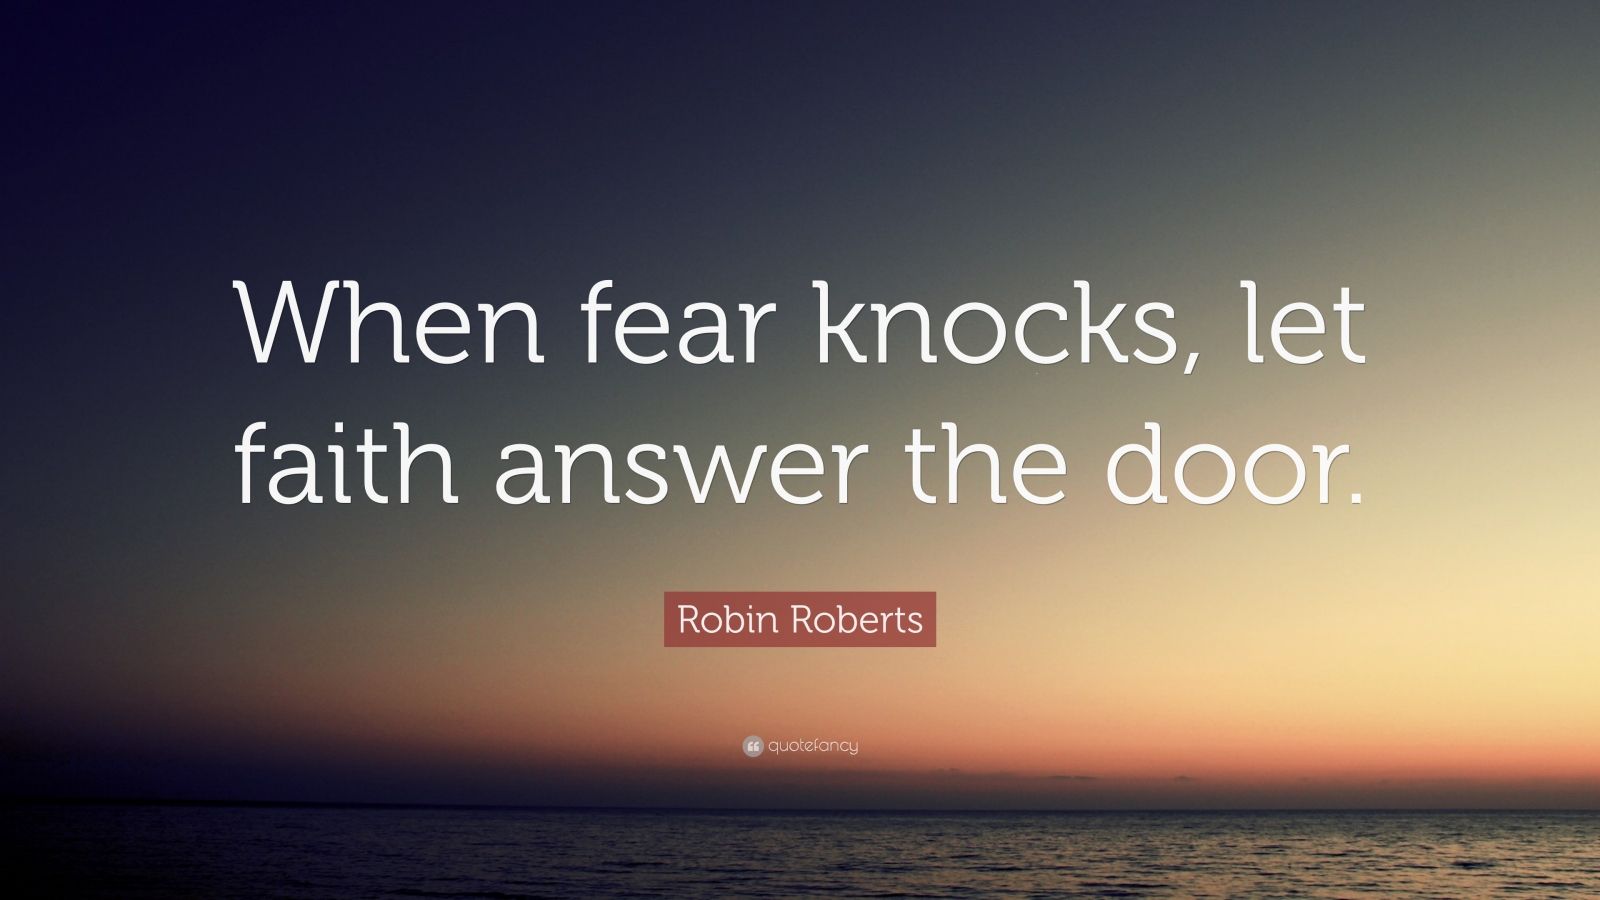 Robin Roberts Quote: “When fear knocks, let faith answer the door.” (12 ...